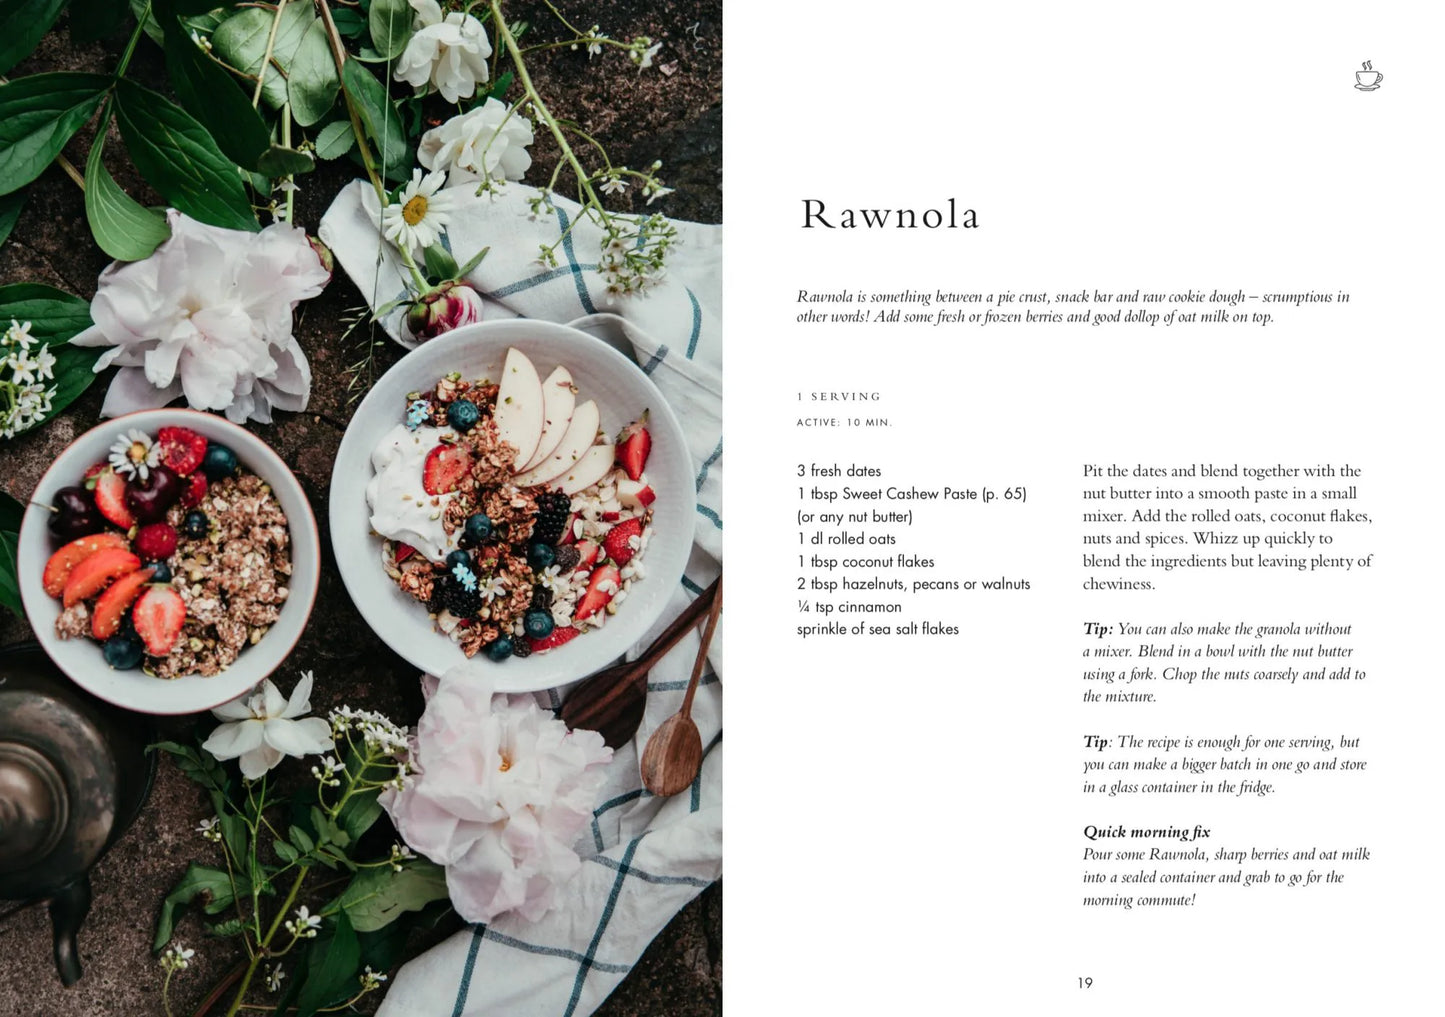 Wonderful Morning | Recipes for a Delicious Start of the Day